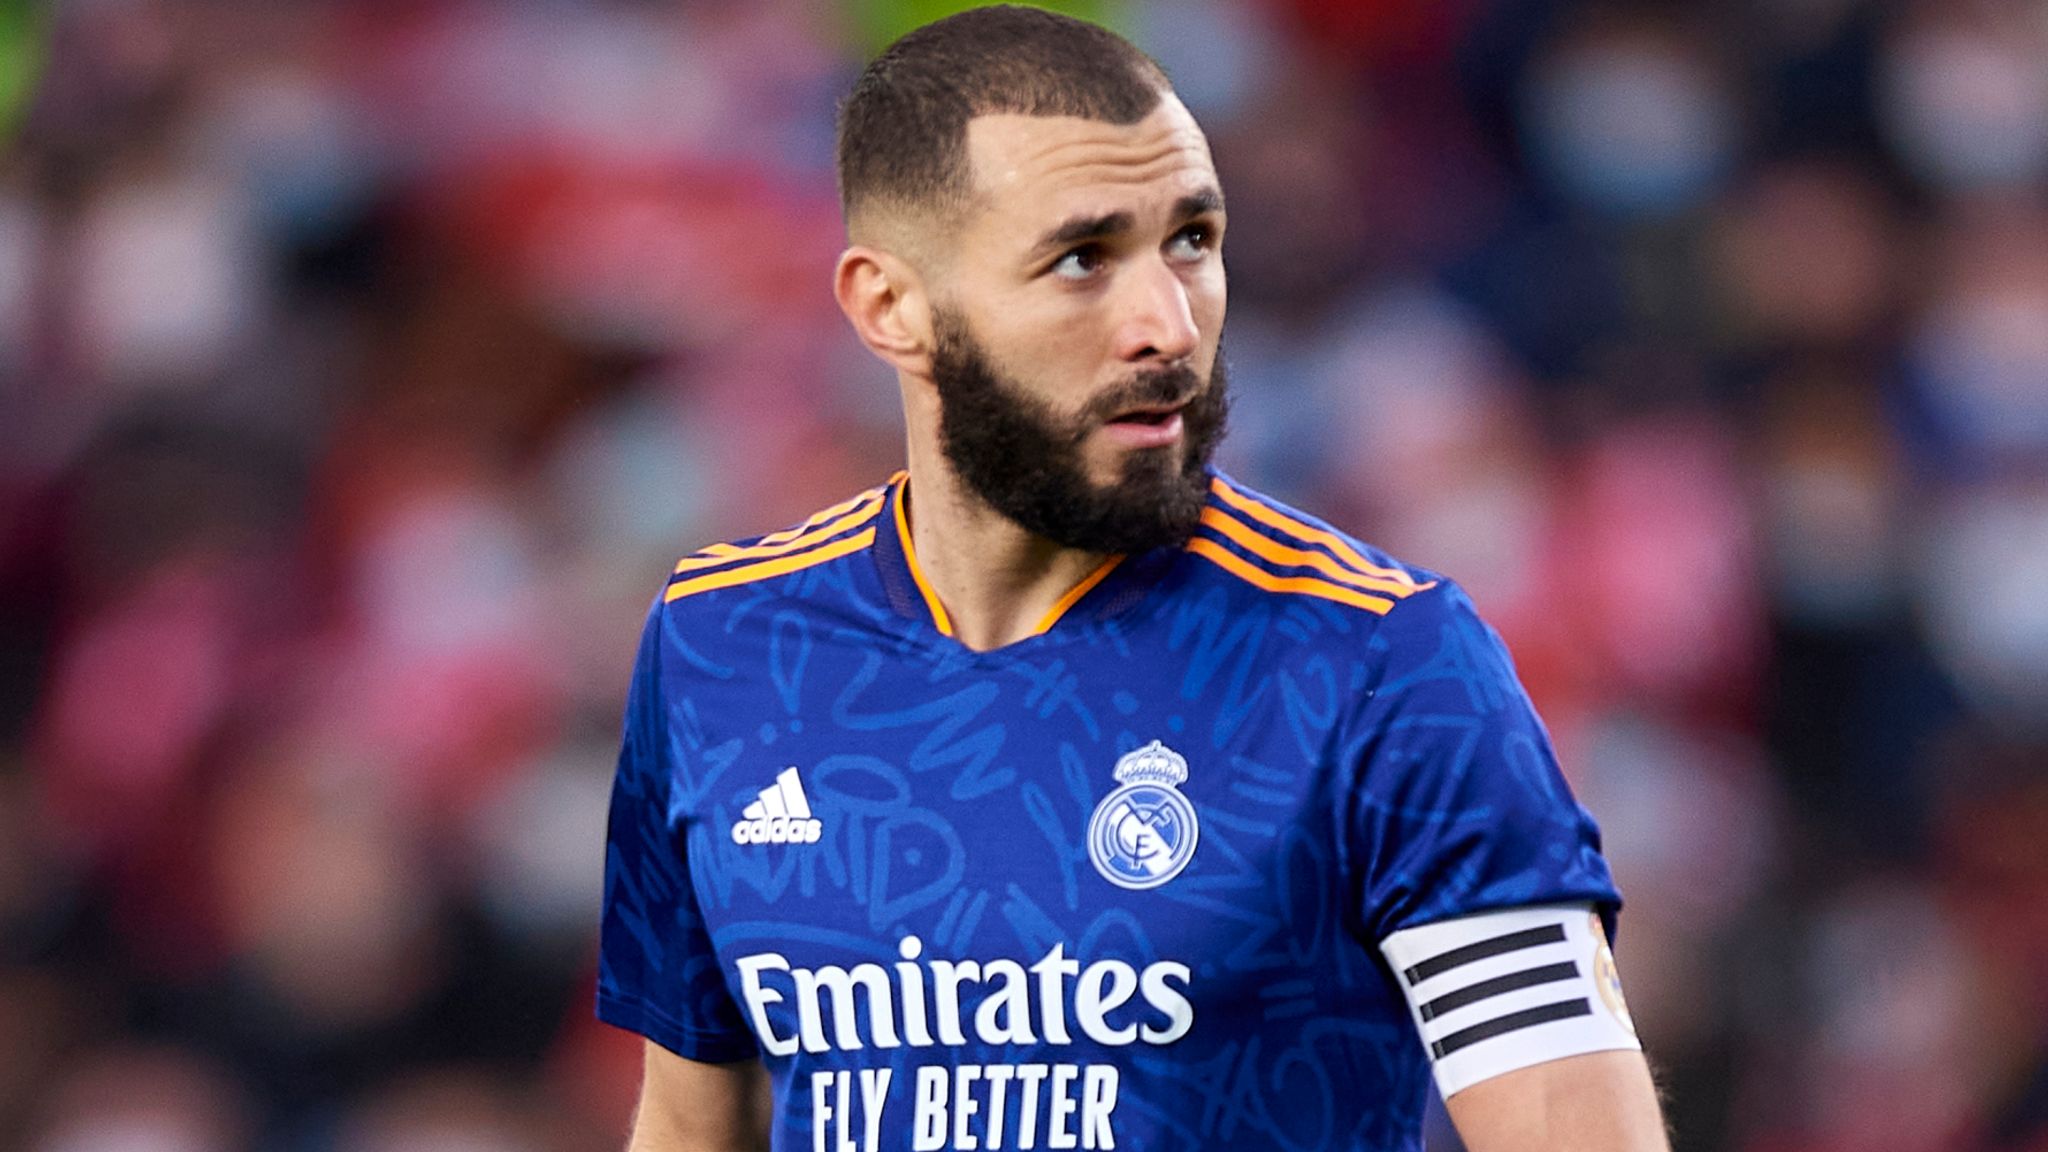 UCL: Benzema opens up on his relationship with Mbappe after Real Madrid snub Post Nigeria